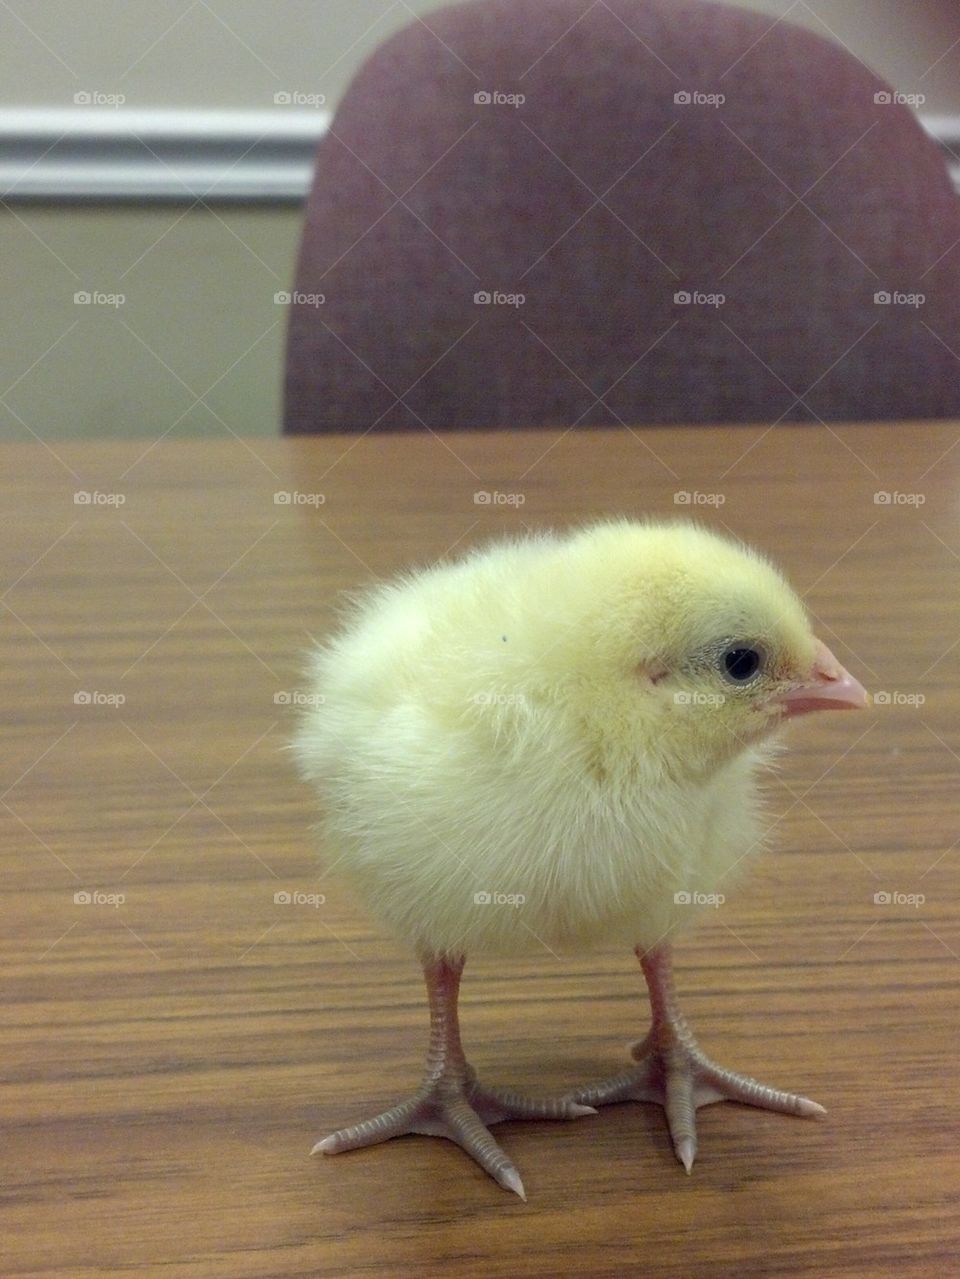 Chick on table